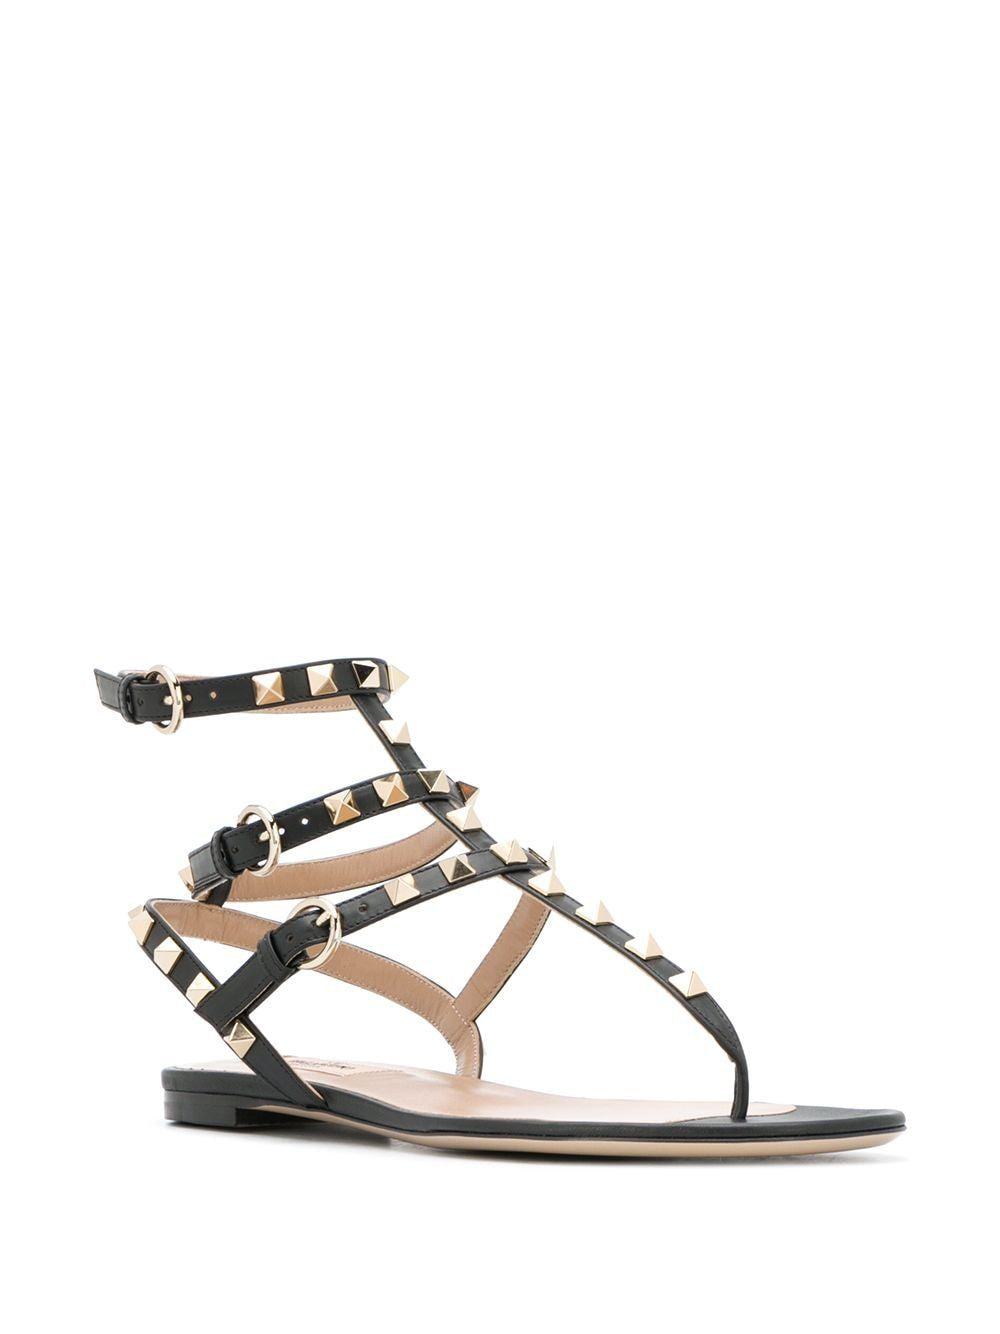 VALENTINO Studded Black Leather Thong Sandals for Women